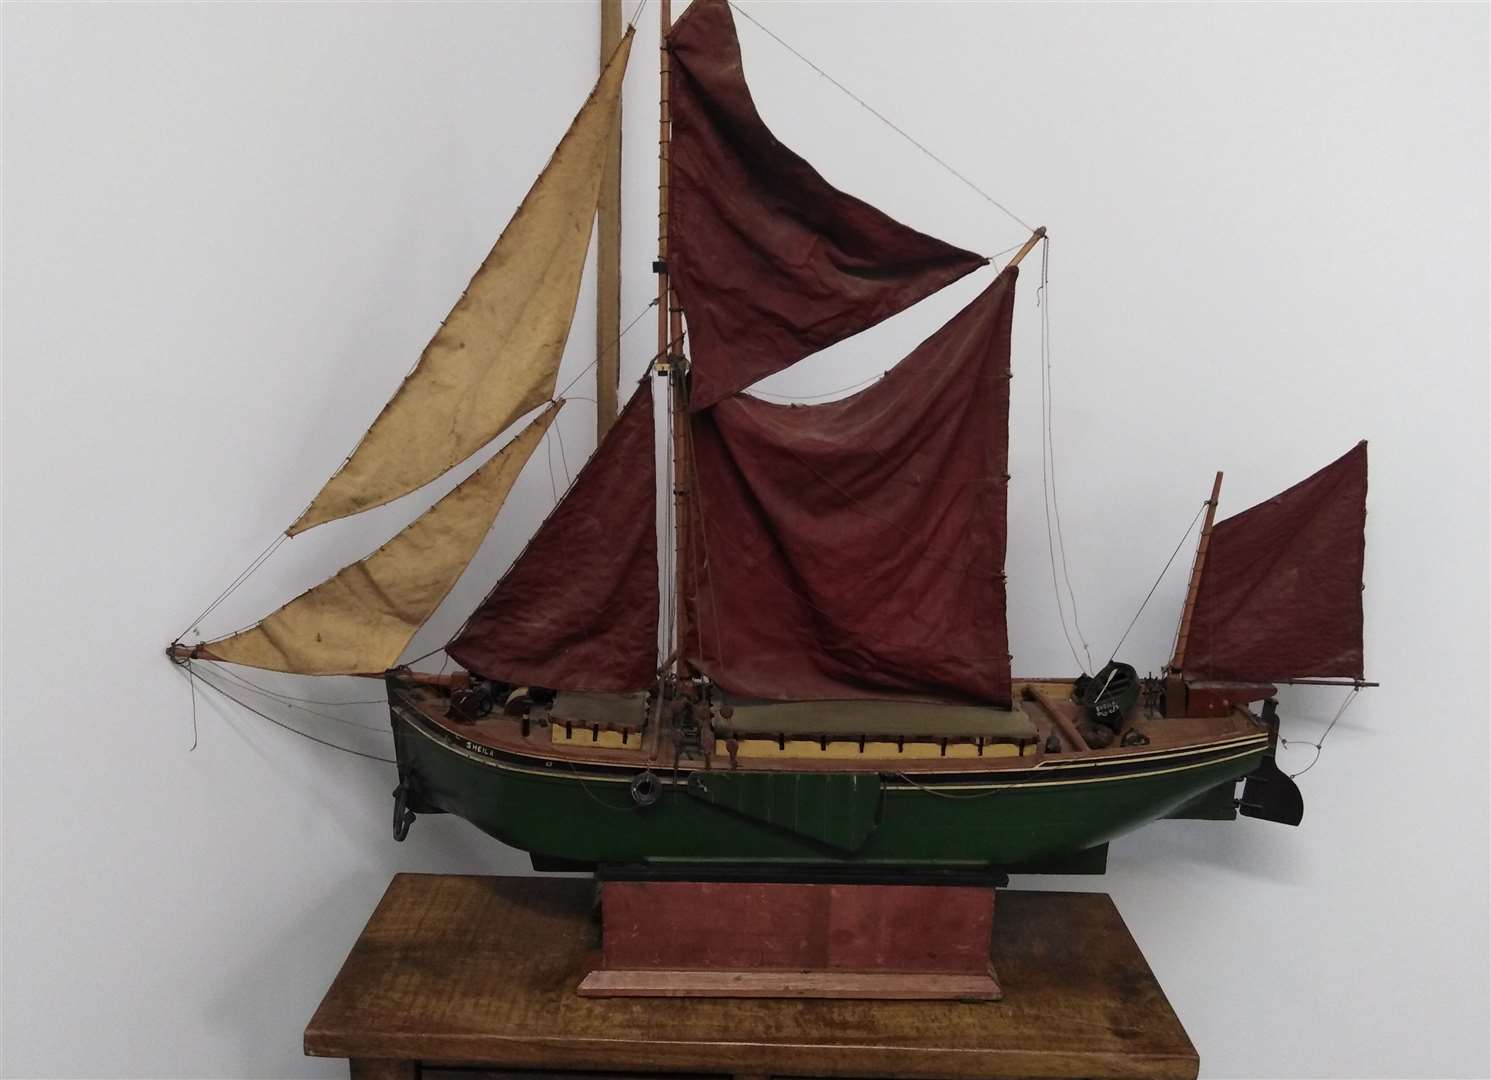 The model Thames sailing barge donated to the Dolphin Sailing Barge Museum